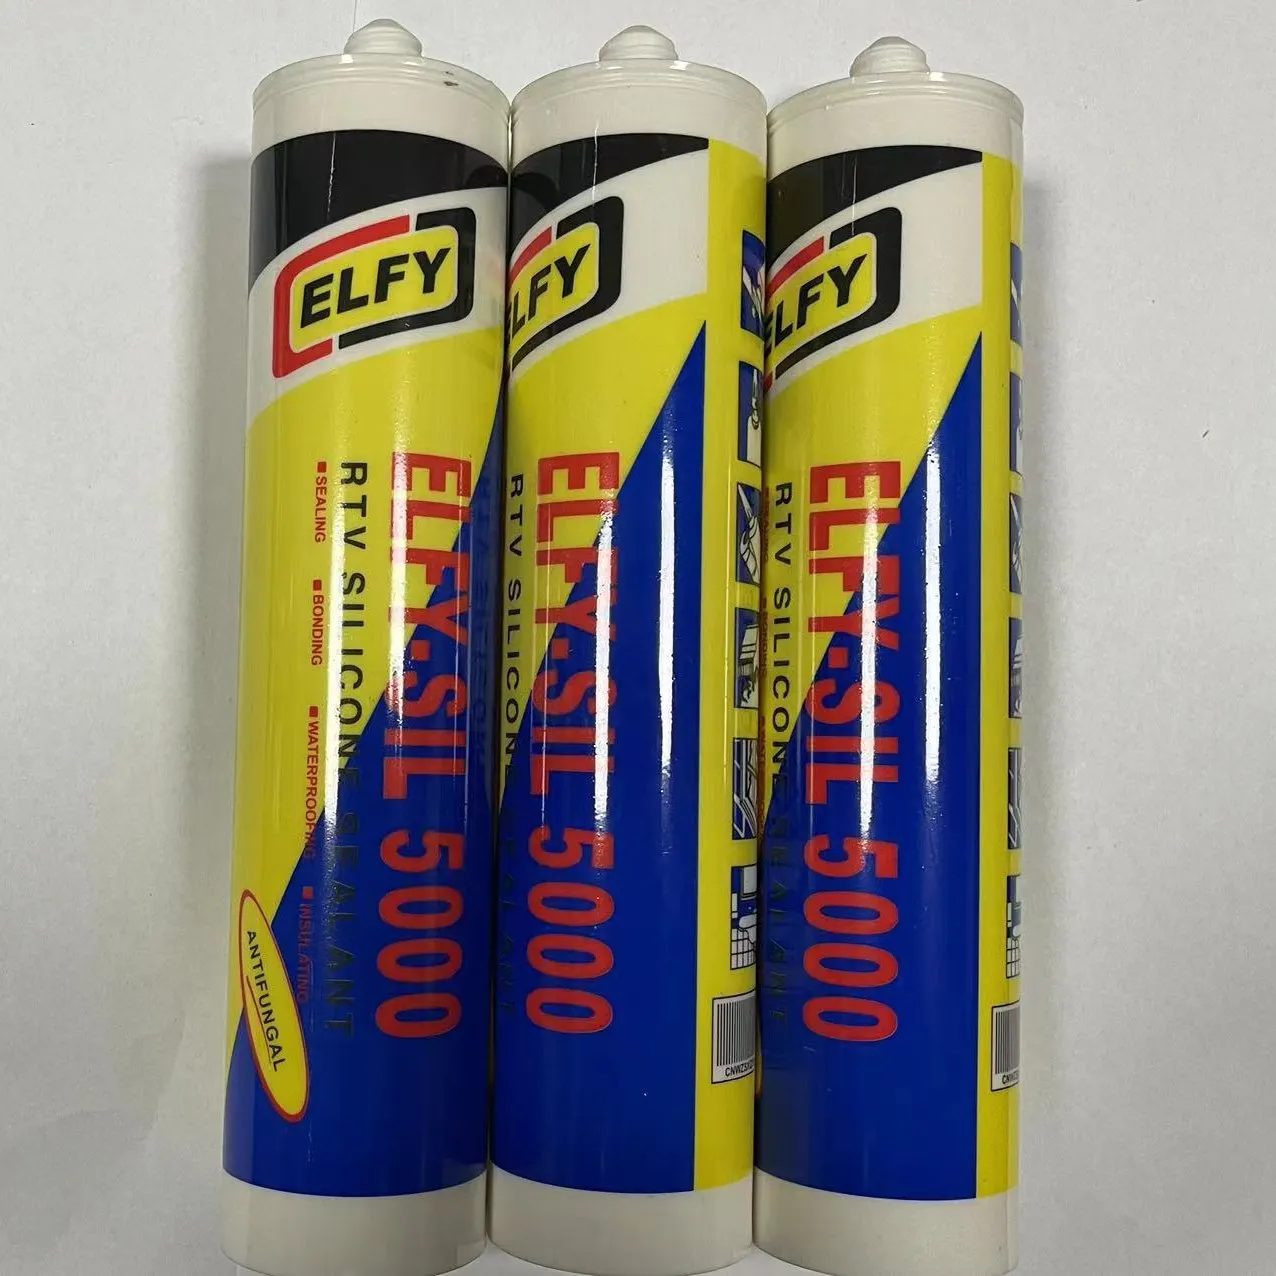 Silicone Sealant quick-drying and strong adhesive force mildew proof window glue